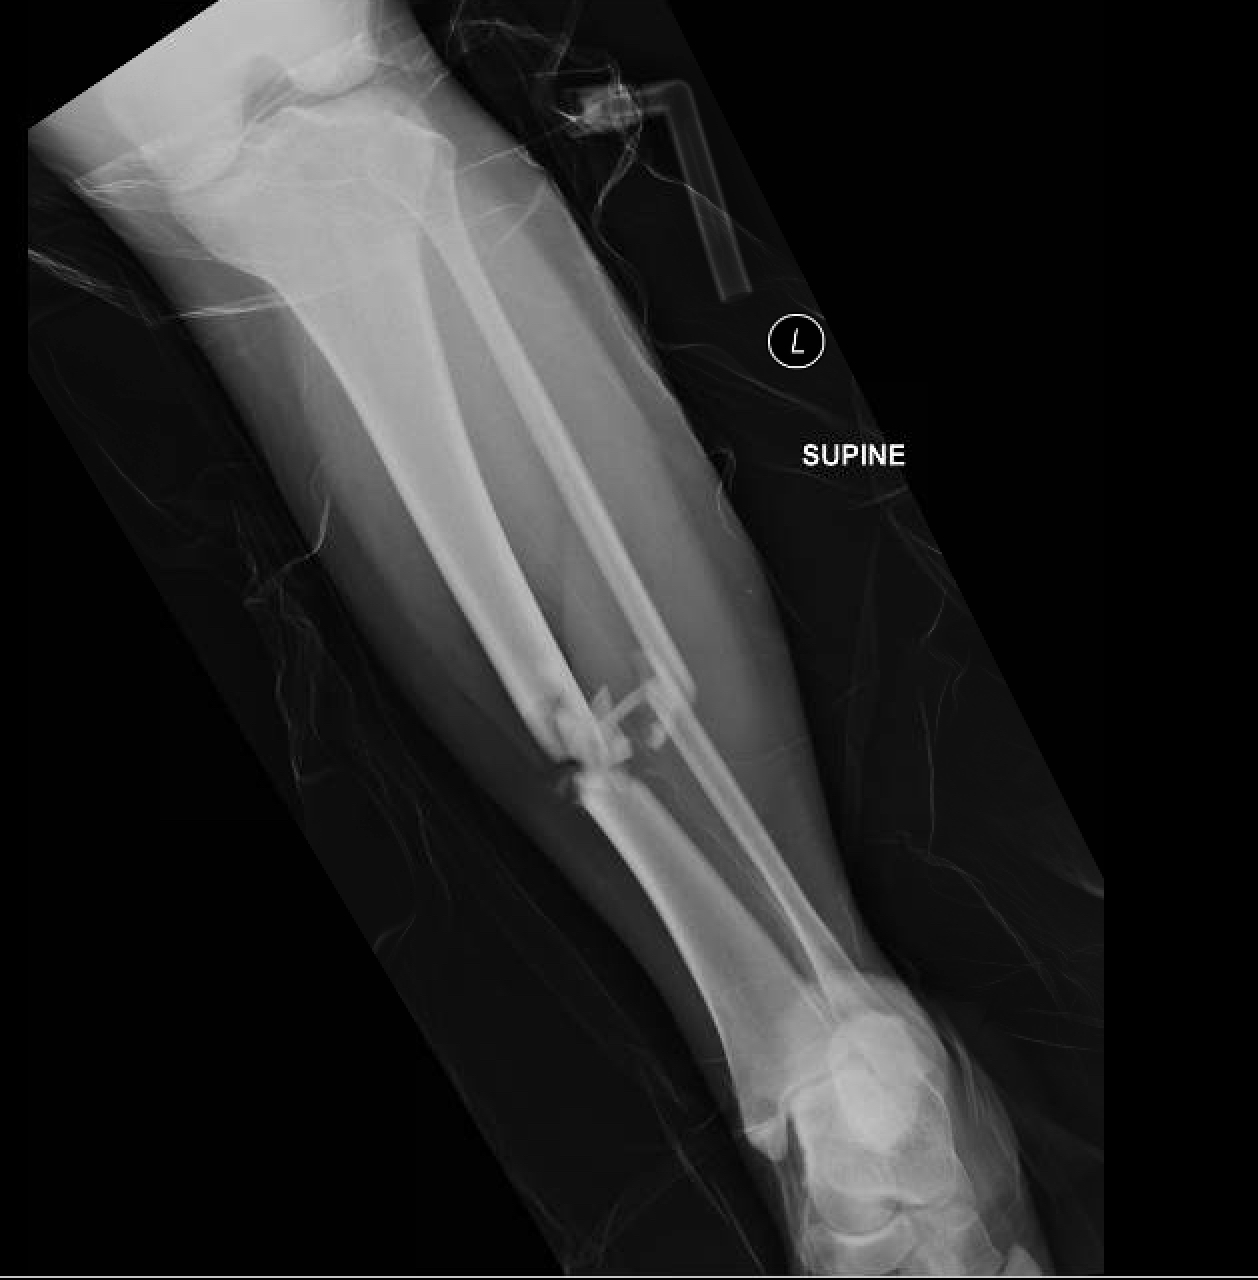 compound fracture x ray